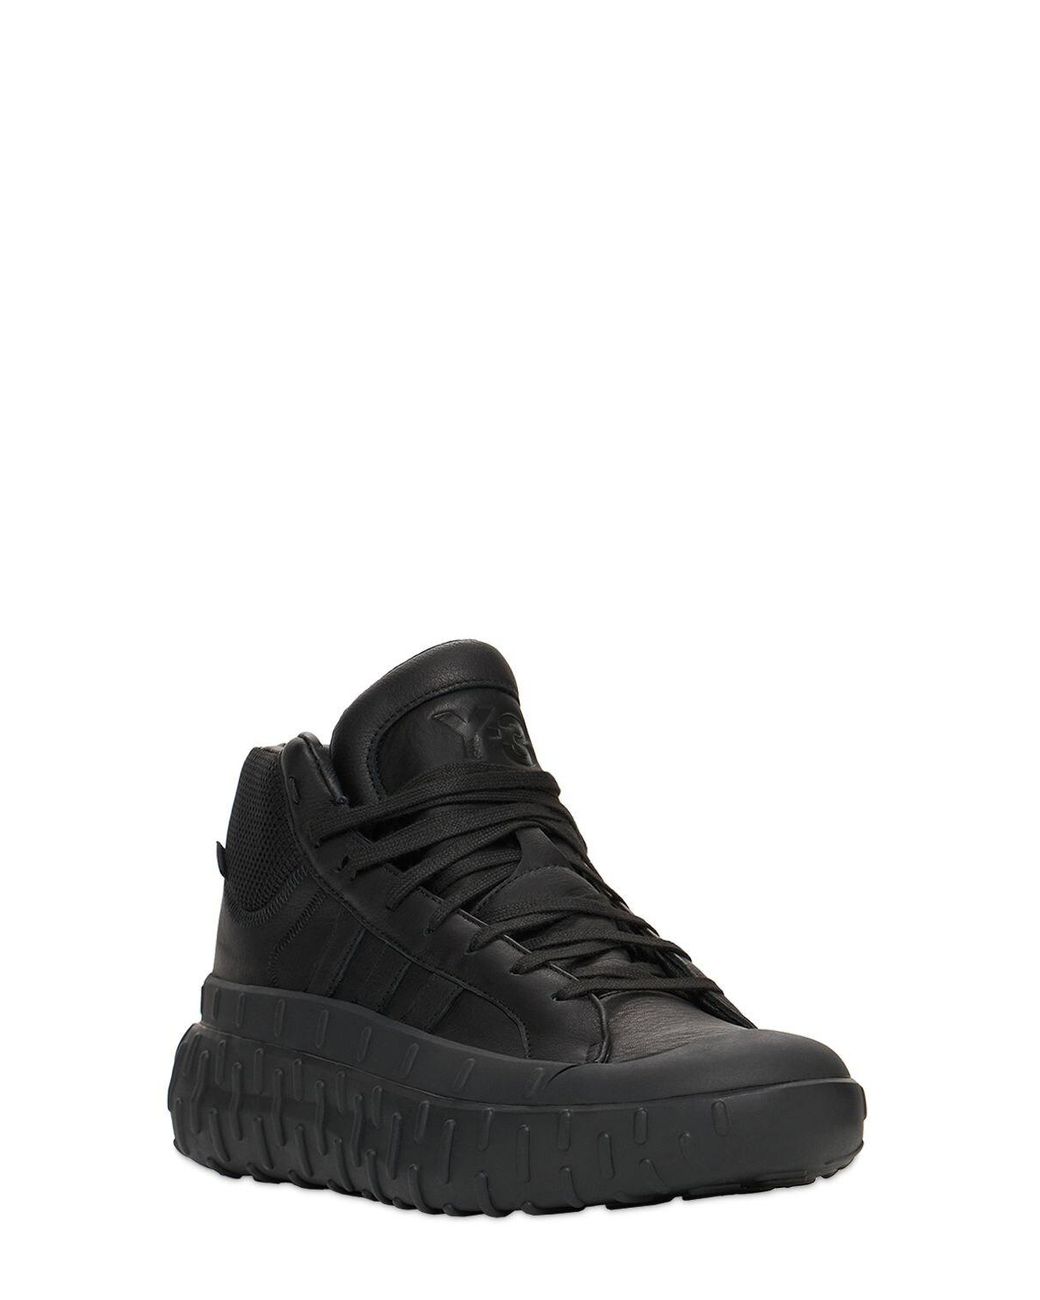 Y-3 Gr.1p High Gtx Leather & Tech Sneakers in Black for Men | Lyst